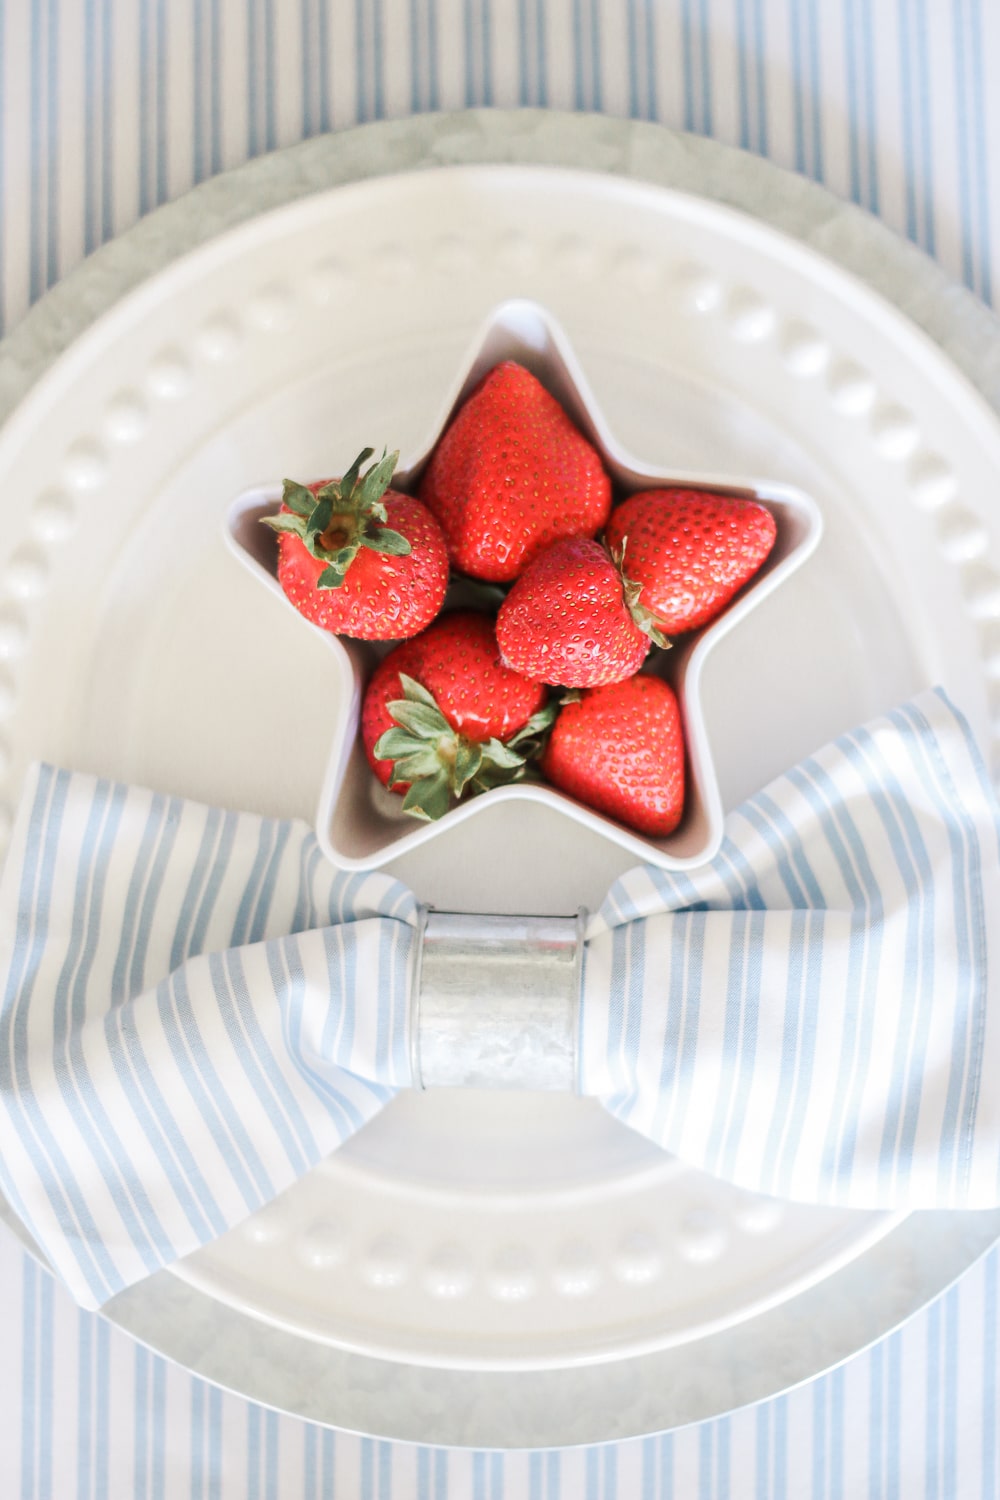 4th of July table setting ideas by blogger Stephanie Ziajka on Diary of a Debutante